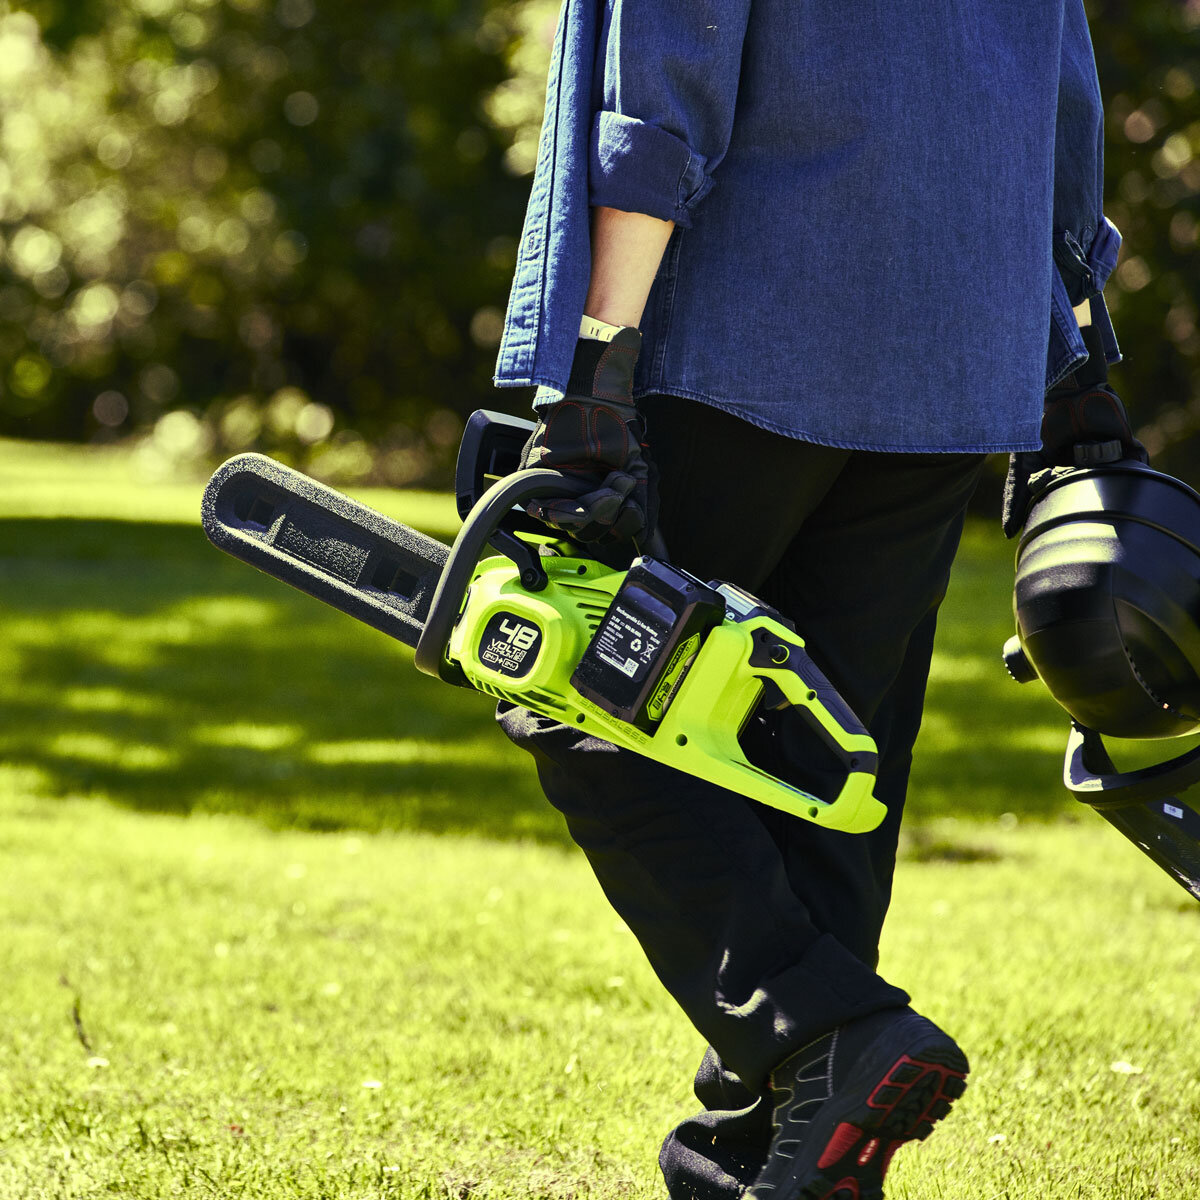 Greenworks 48V 36cm Cordless Brushless Chainsaw + 2 x 24V (4Ah) Battery & 2Ah Twin Charger Bundle